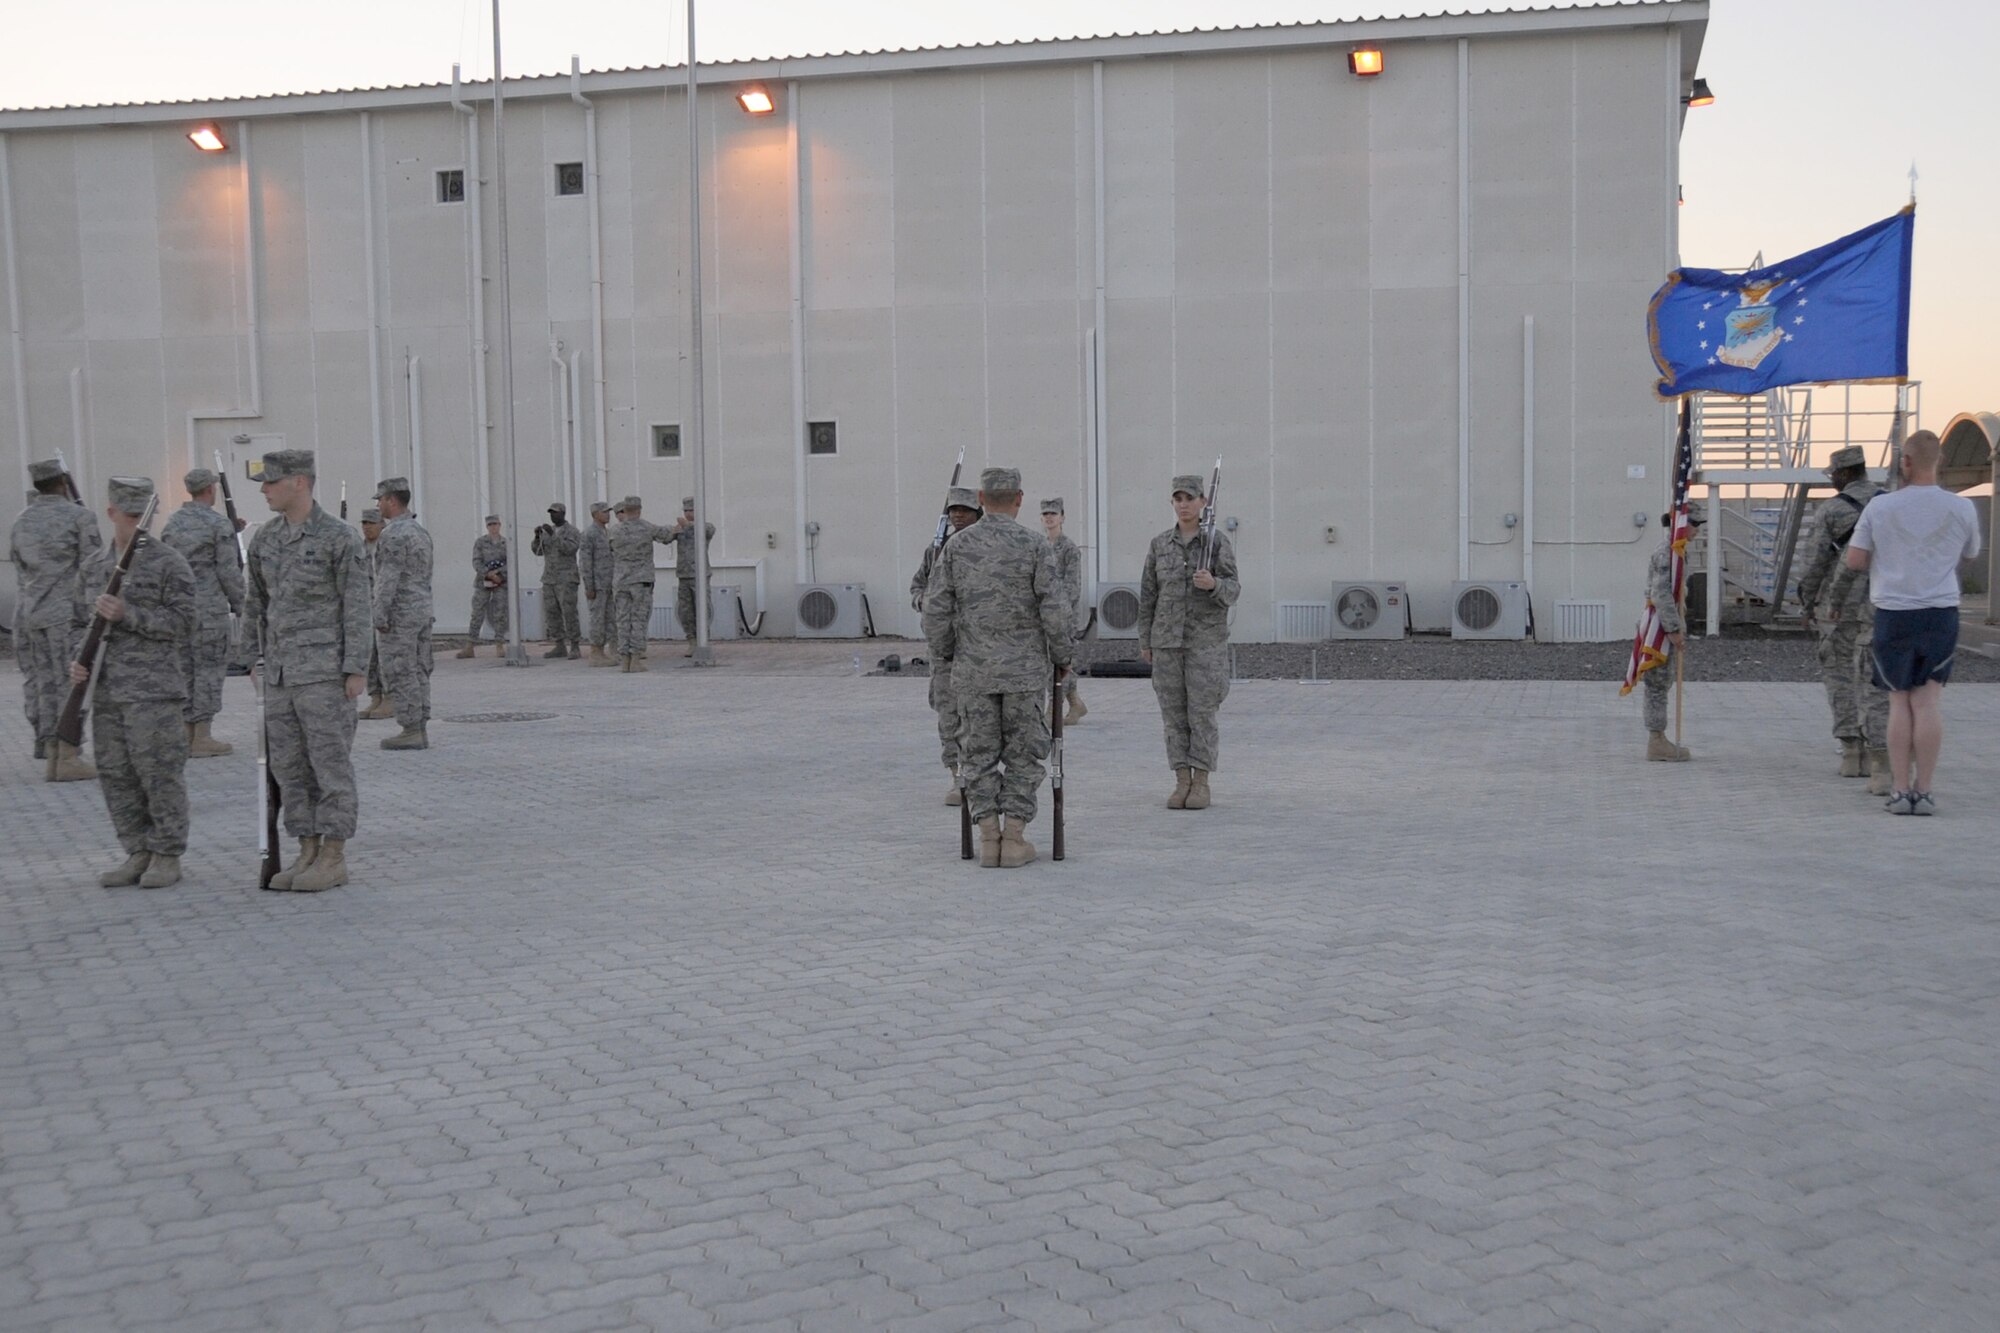 Members of the 380th Air Expeditionary Wing honor guard practice drill and ceremony procedures at an undisclosed location in Southwest Asia on Jan. 19, 2010.  The group is comprised of deployed Airmen that work, on average, 12 plus hours each day in their indivual work units and volunteer for the honor guard twice a week for several hours as well as performing drill and ceremony at official functions throughout the base. (U.S. Air Force photo/Senior Airman Jenifer H. Calhoun/Released)
